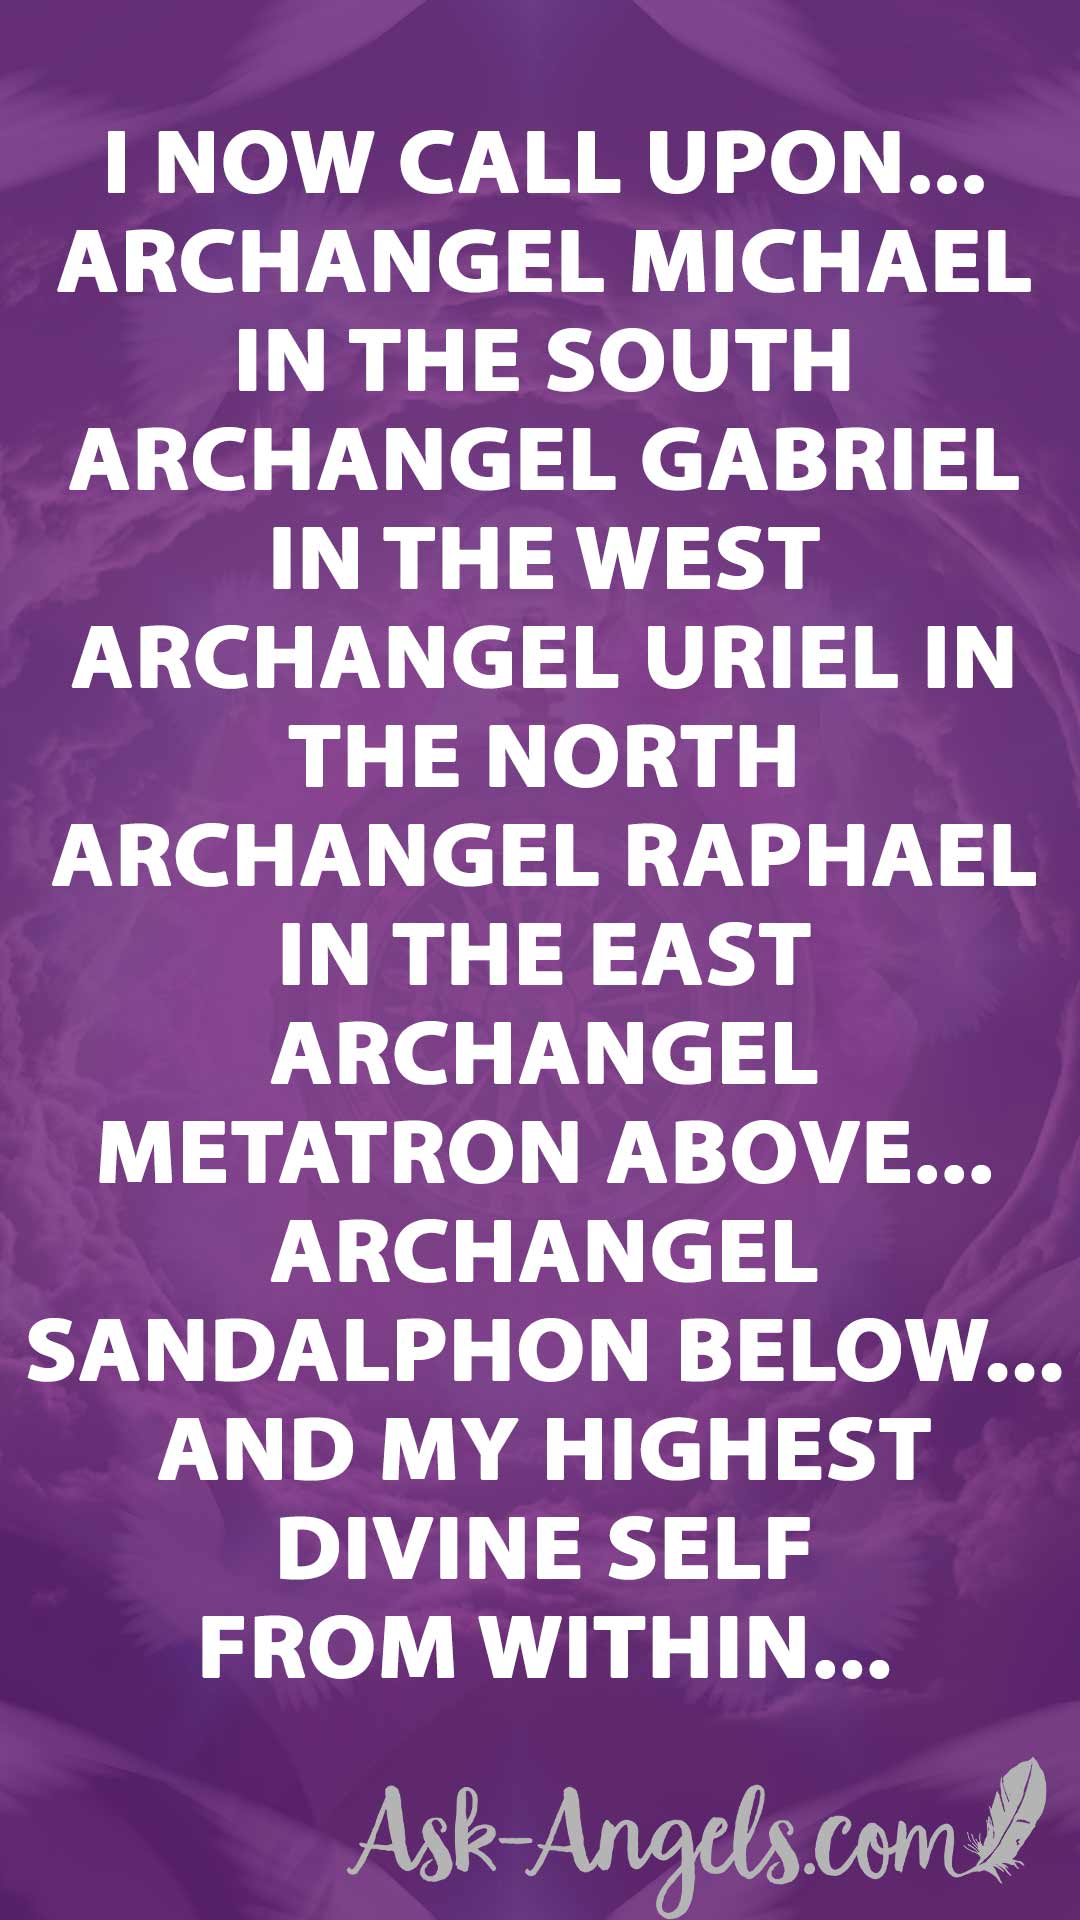 Archangel Invocation - Calling in the Archangels from every direction. East, South, West, North, Above, Below... Within...